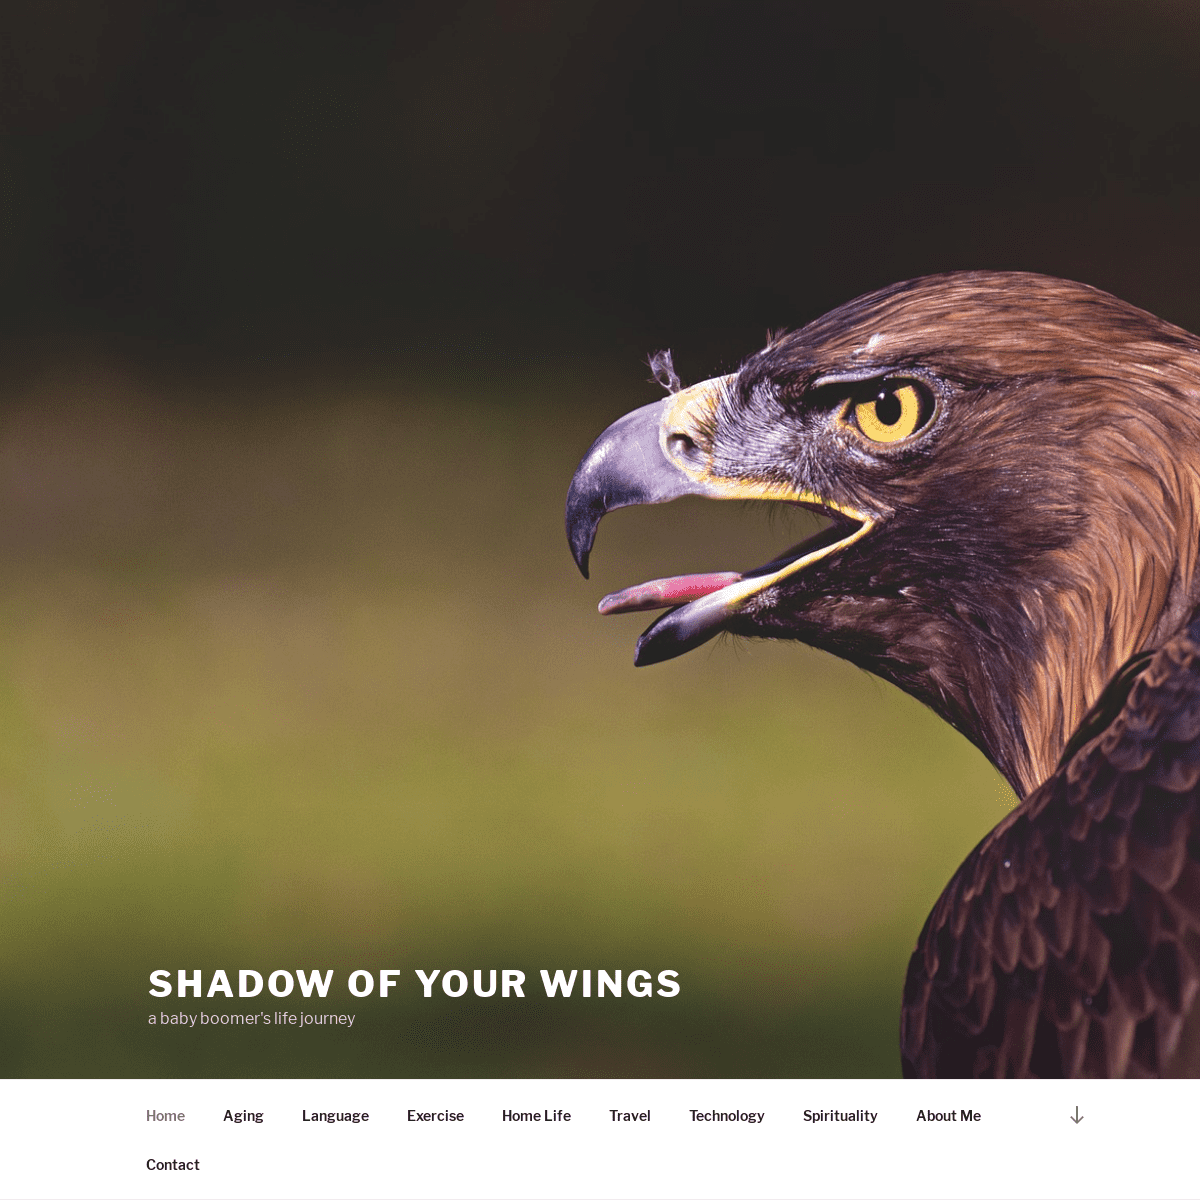 A complete backup of shadowofyourwings.com